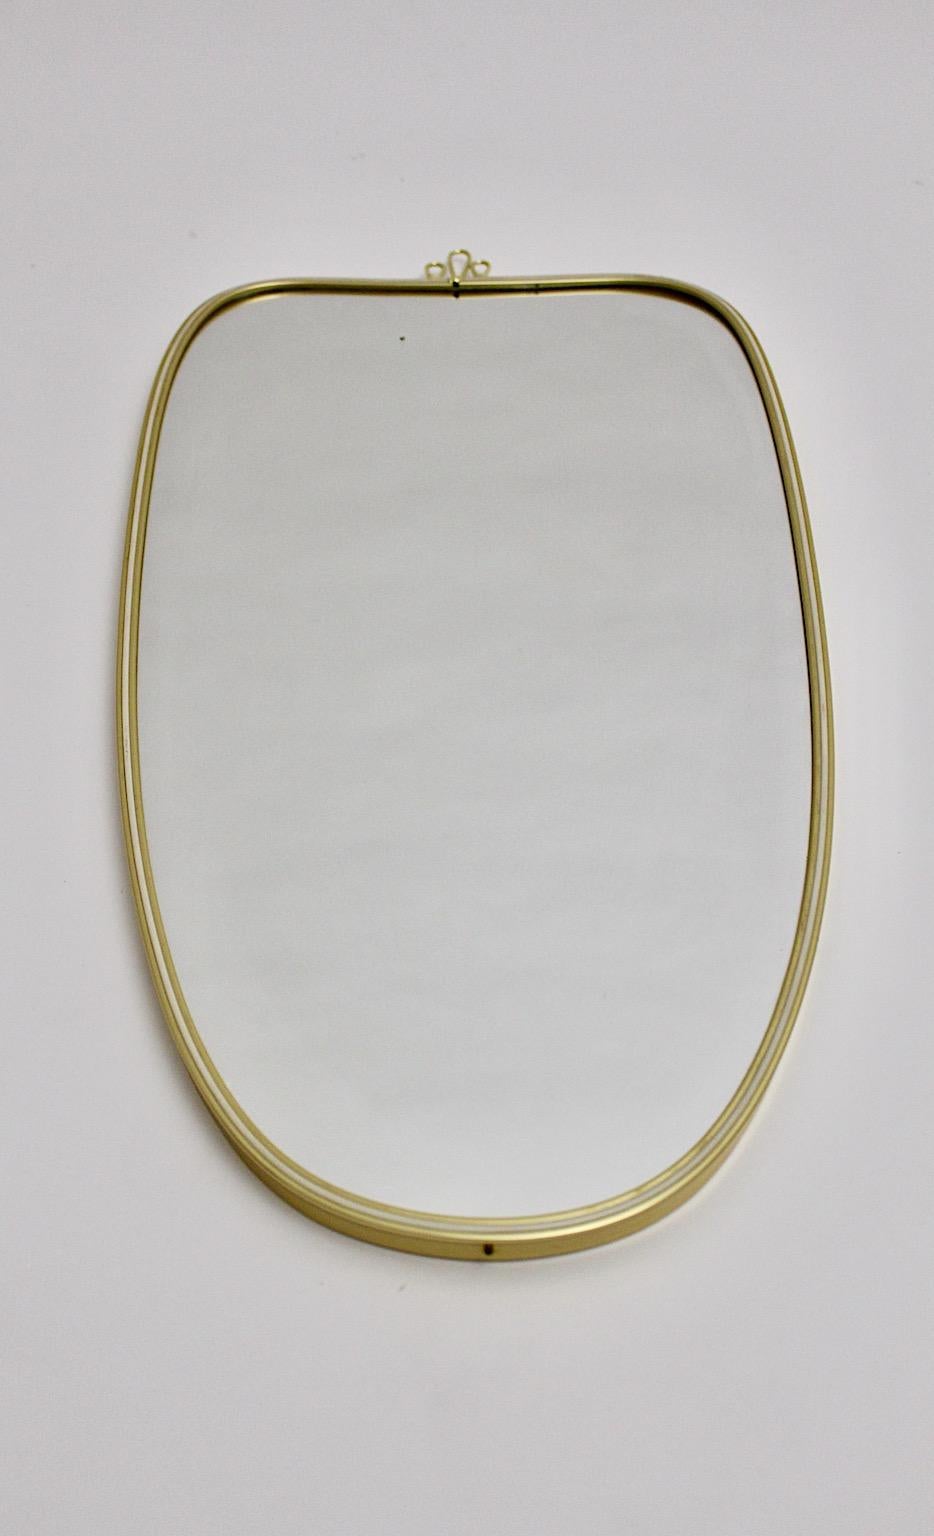 Modernist vintage oval wall mirror from mirror glass and golden metal Italy 1950s.
This amazing wall mirror shows an elegant oval shape with a small curved decor at the top.
The condition is good with signs of age and use. The mirror glass has a